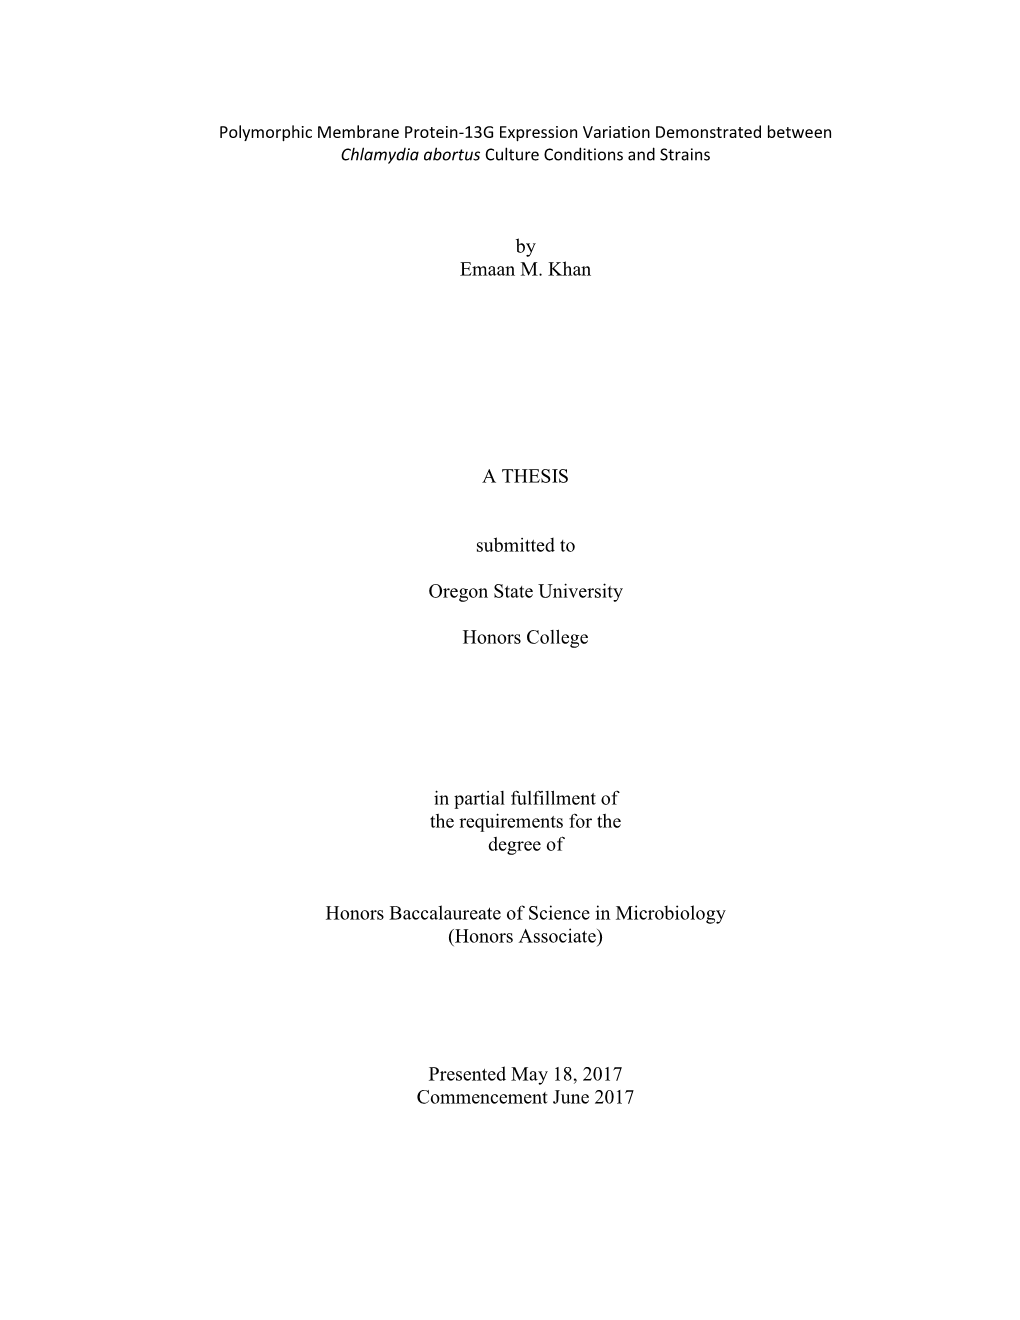 By Emaan M. Khan a THESIS Submitted to Oregon State University Honors College in Partial Fulfillment of the Requirements For